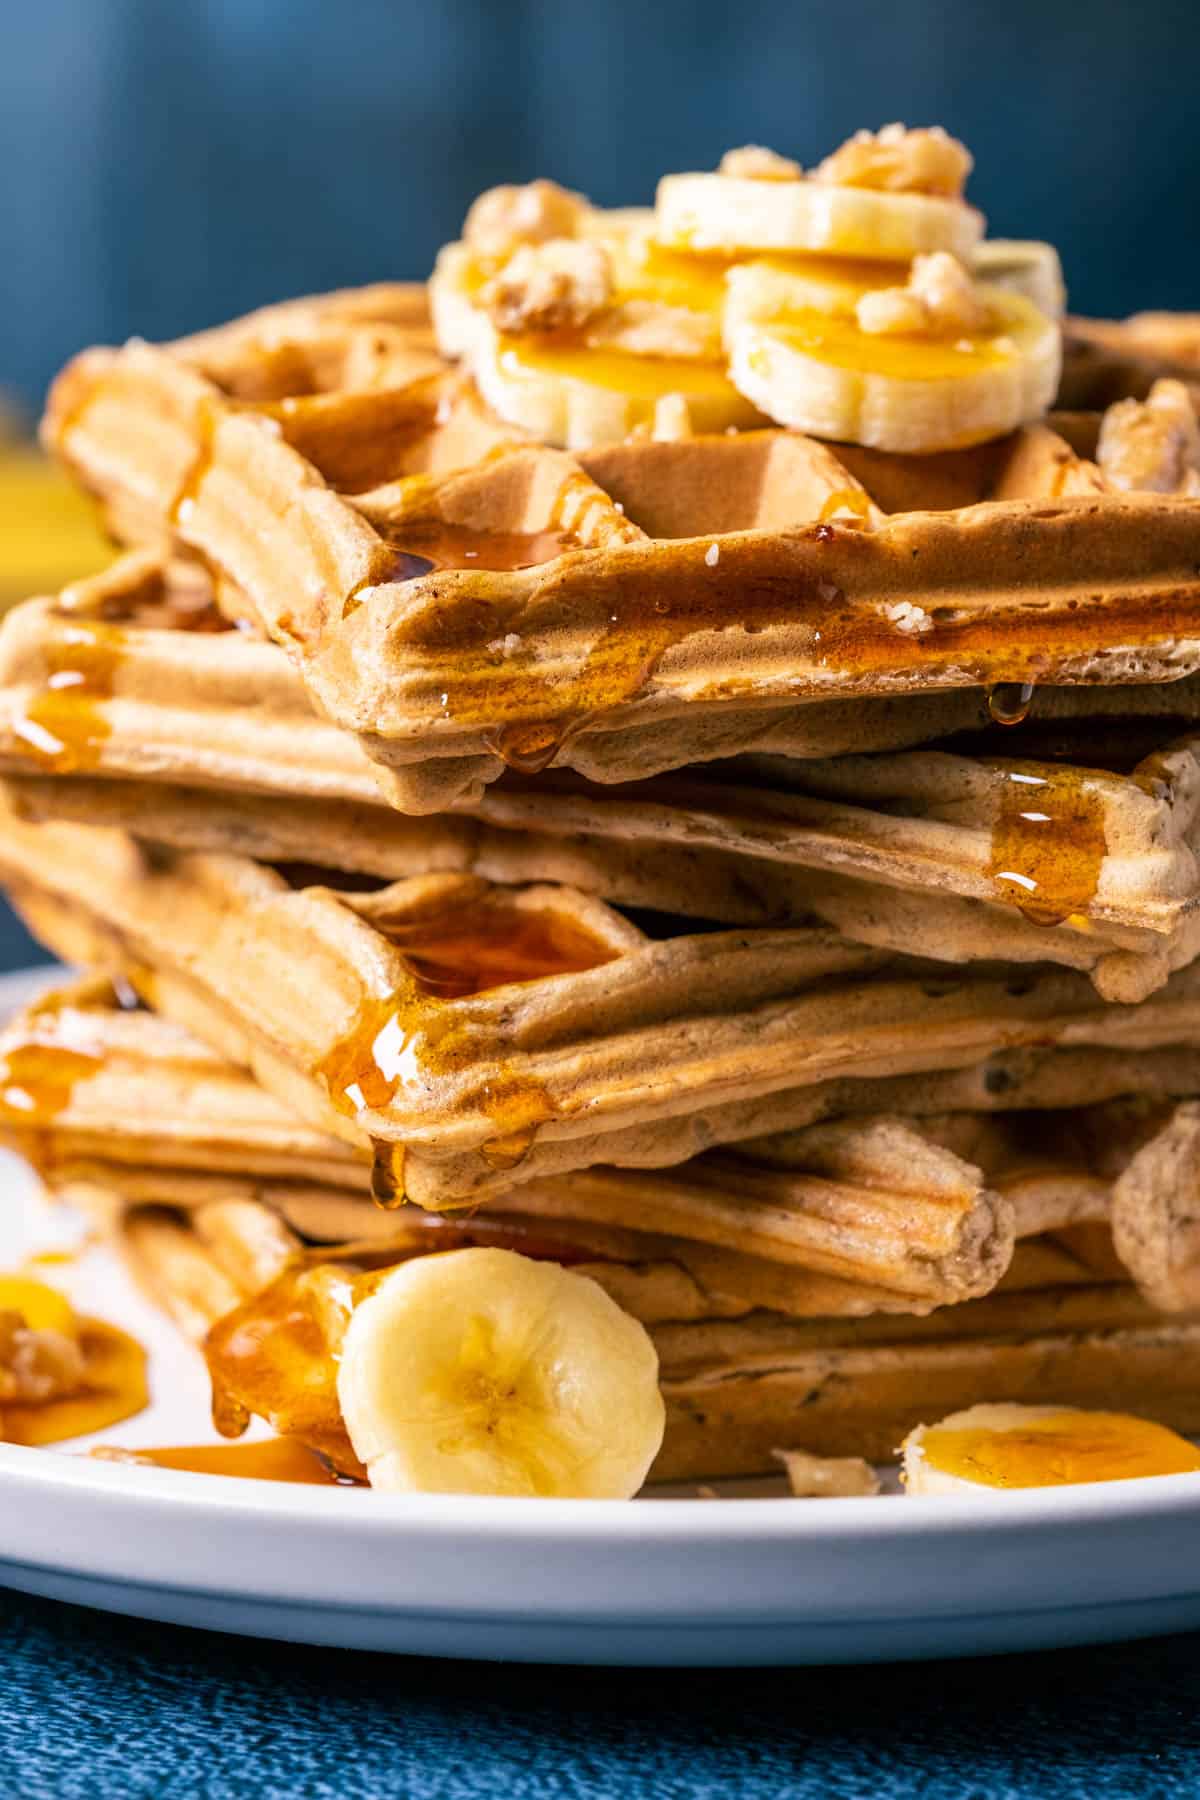 Stack of vegan banana waffles topped with sliced banana, walnuts and syrup on a white plate.